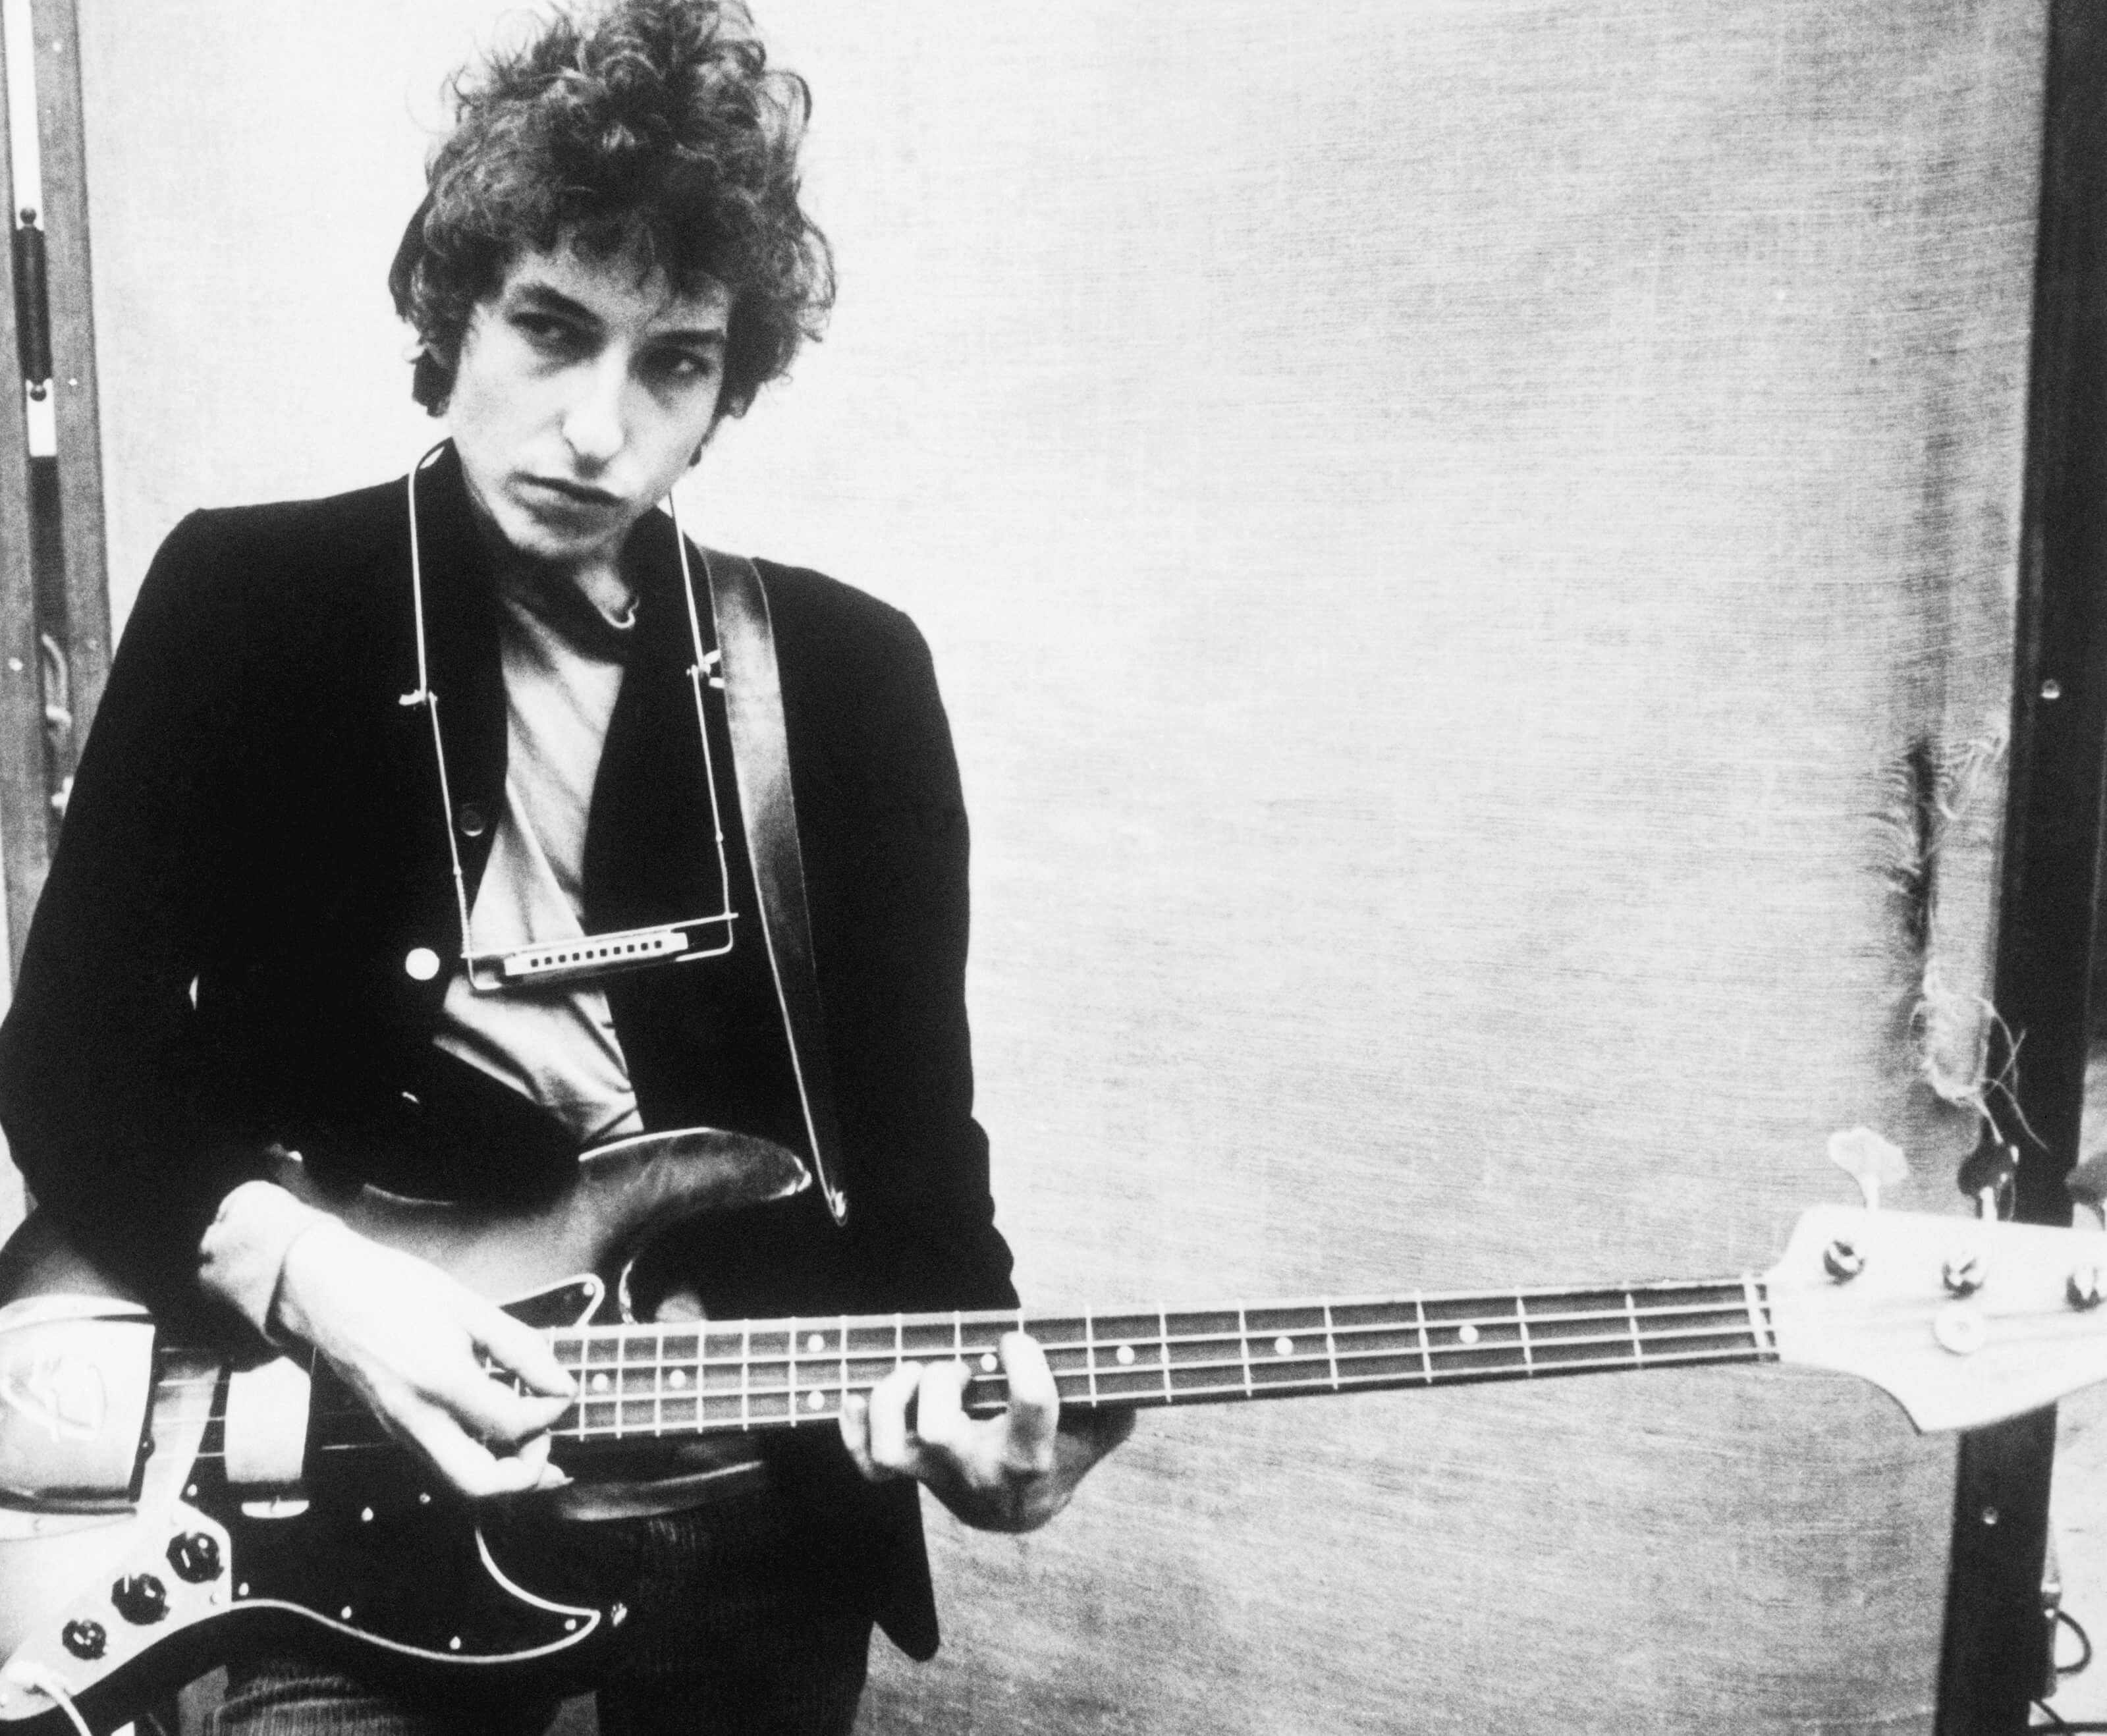 "Lay Lady Lay" singer Bob Dylan with a guitar